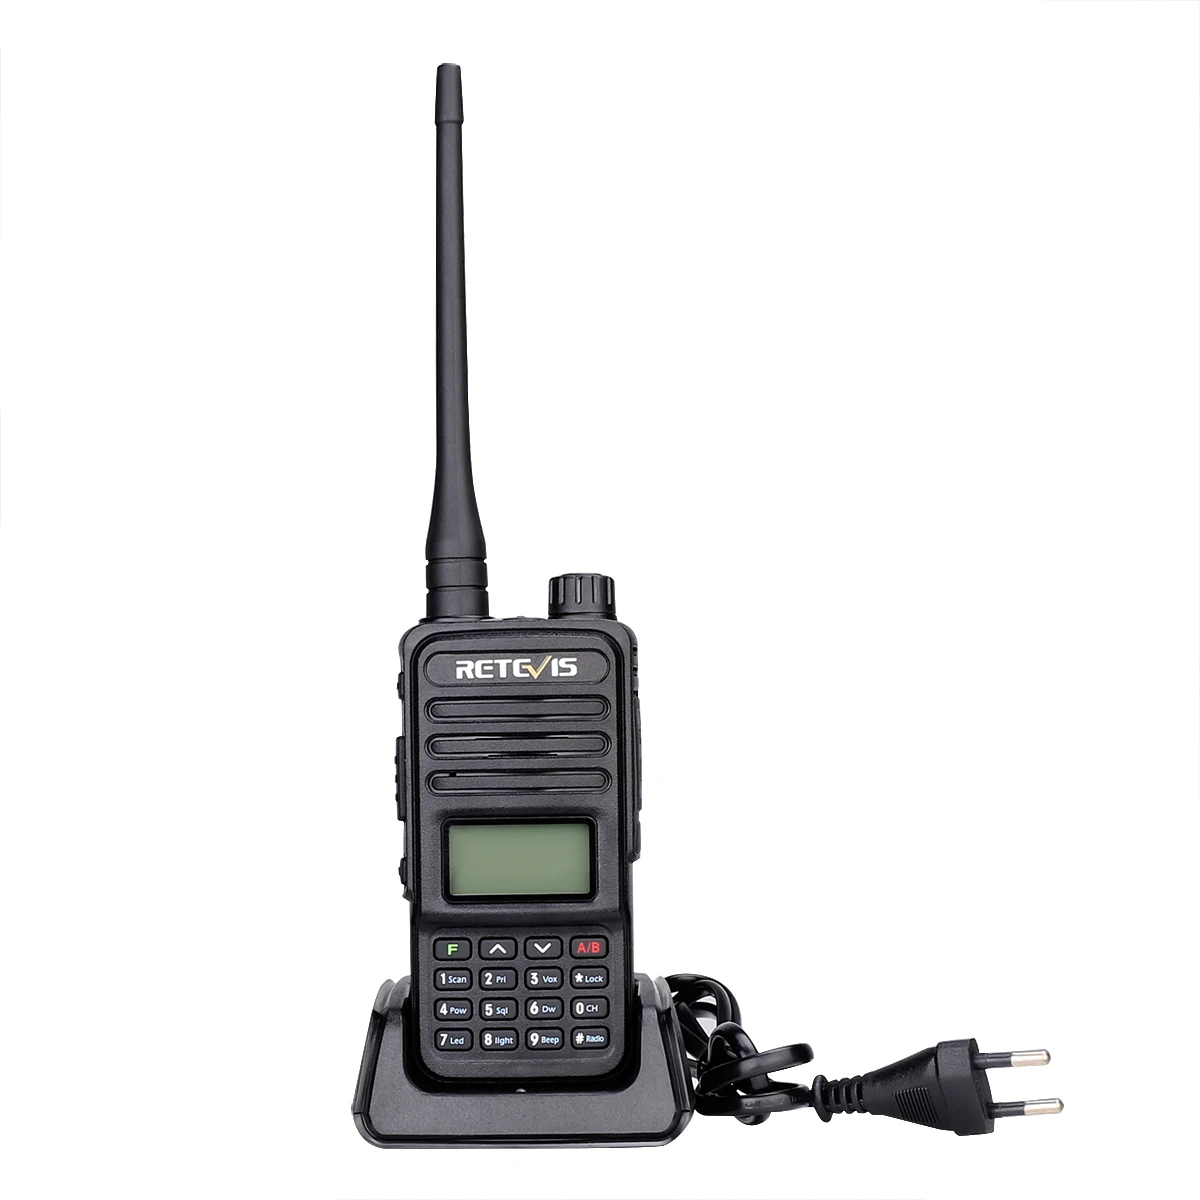 

Retevis RT85 Dual band dual standby Analog Two Way Radio 5W dual display walkie talkie for hams outdoor activities